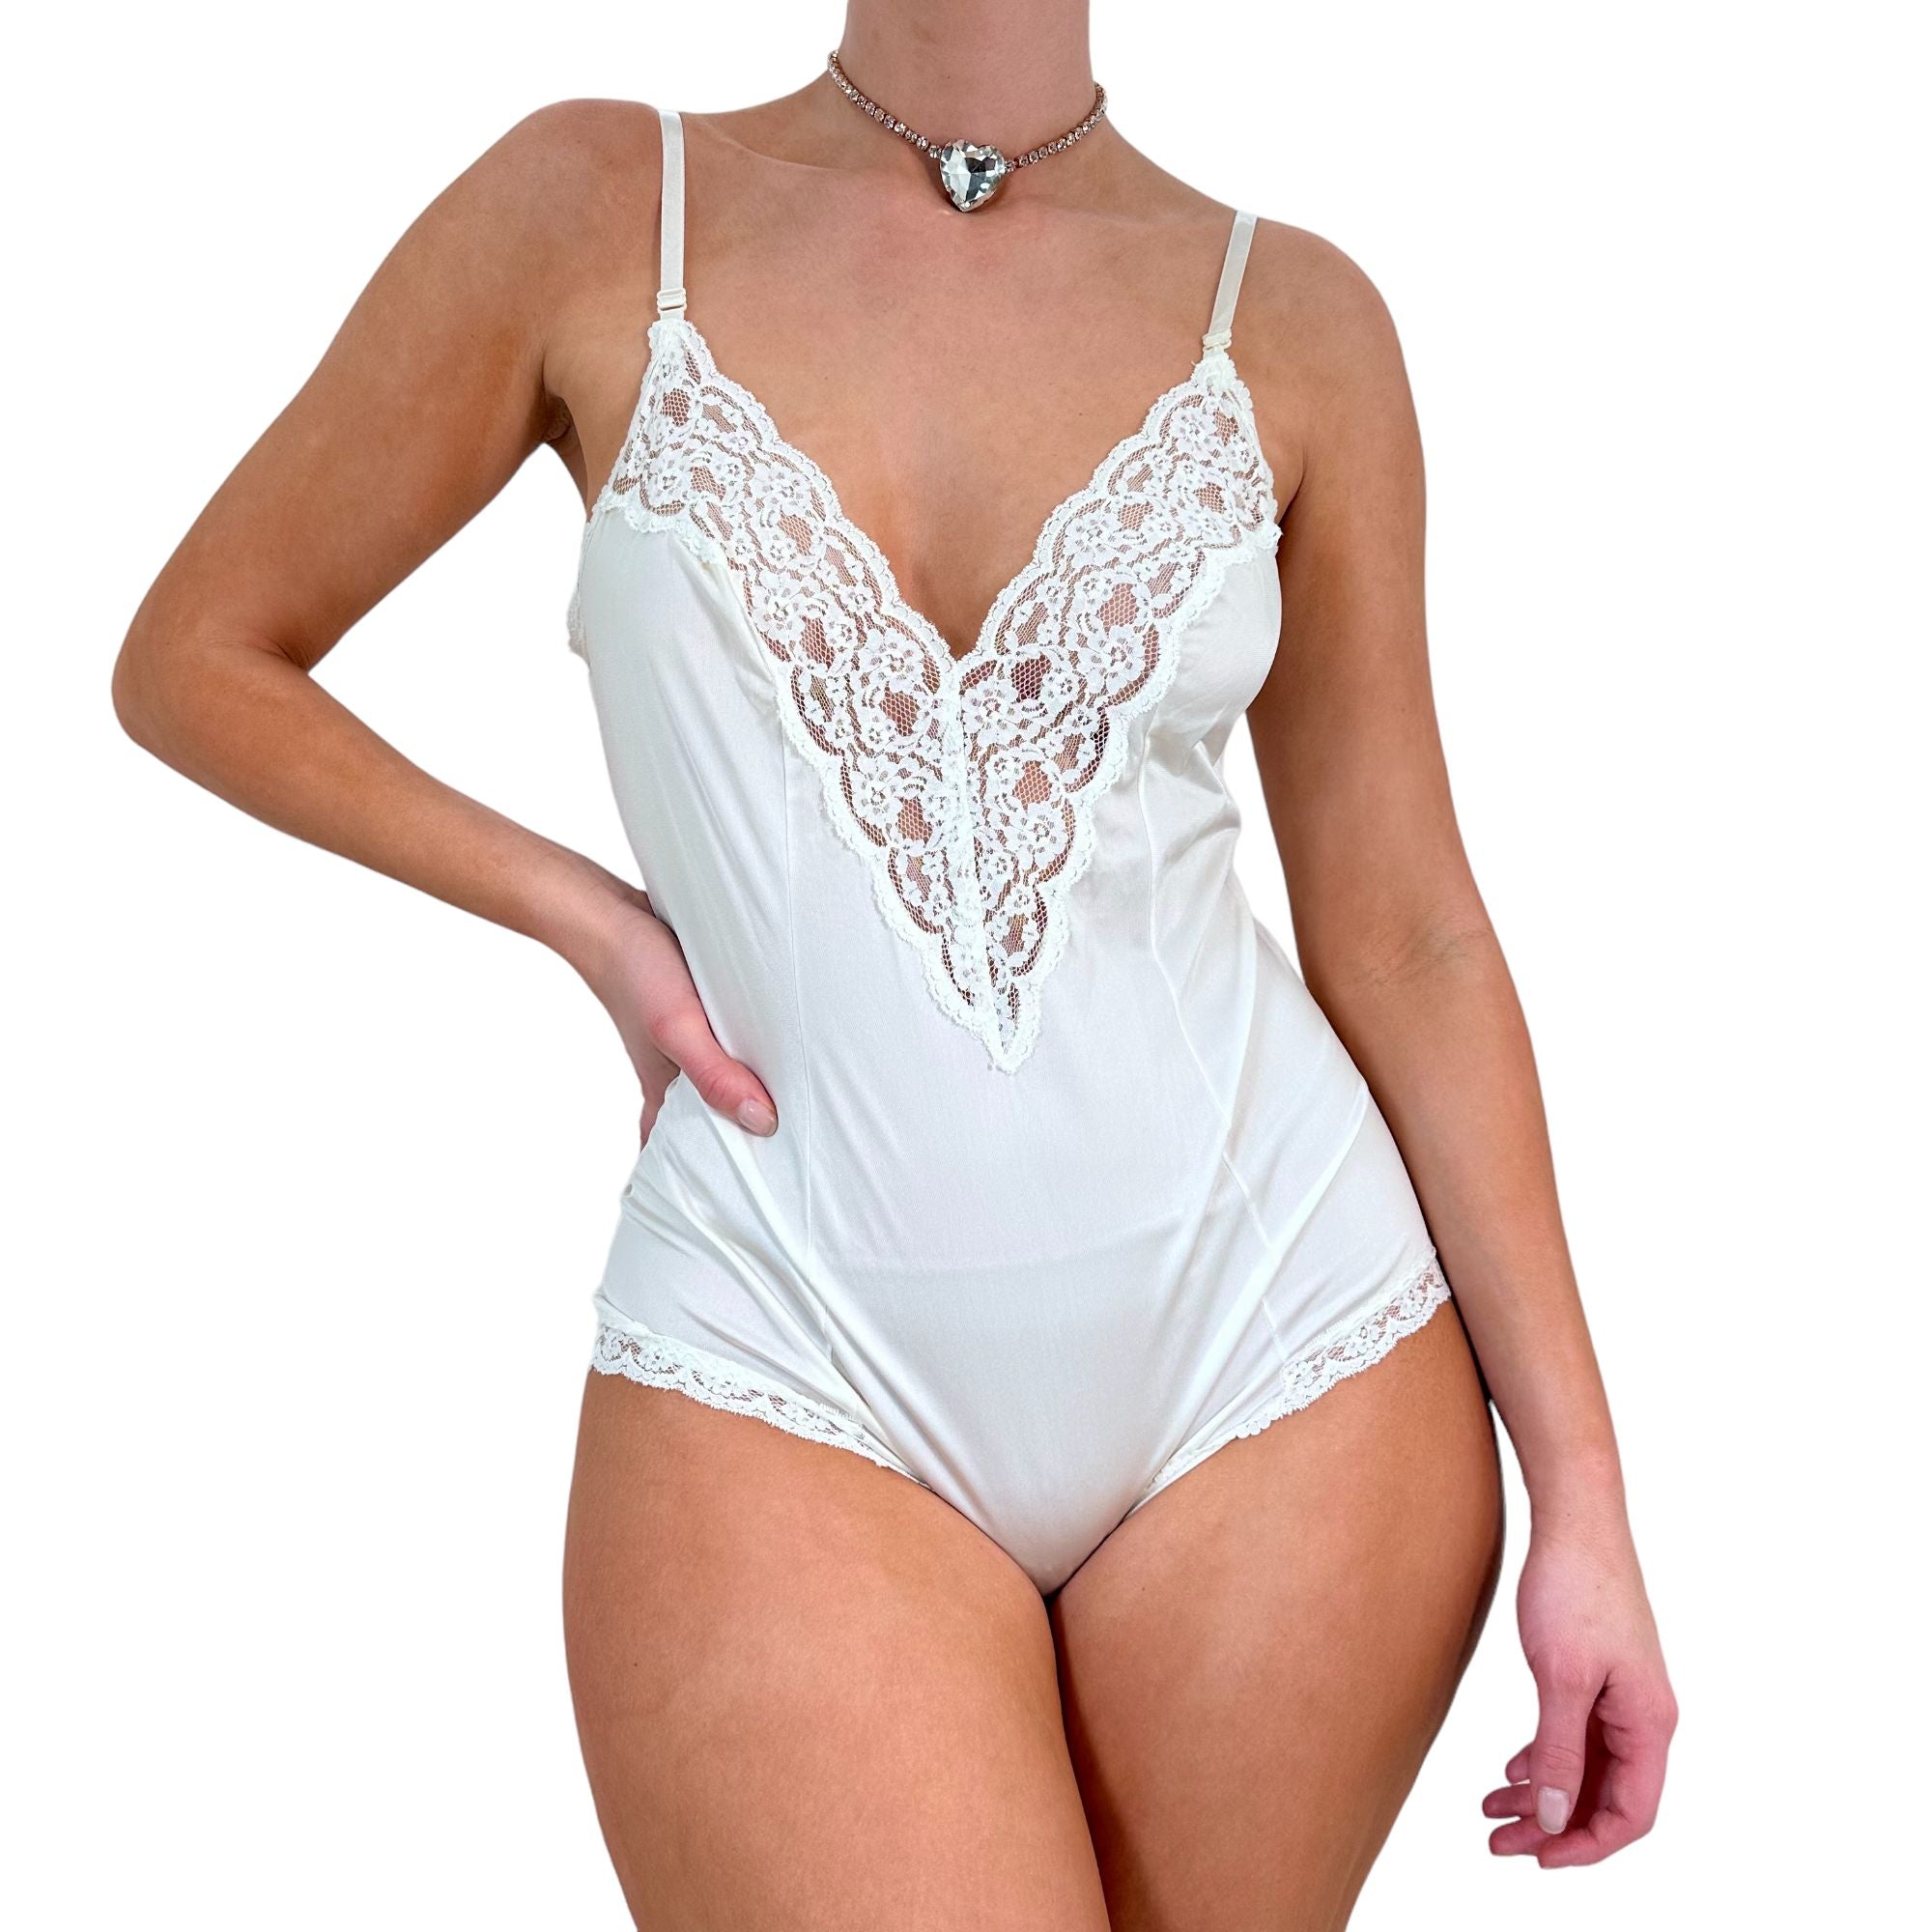 delicate vintage 1990s baroness see-through rose bodysuit - HOLY GARBAGE